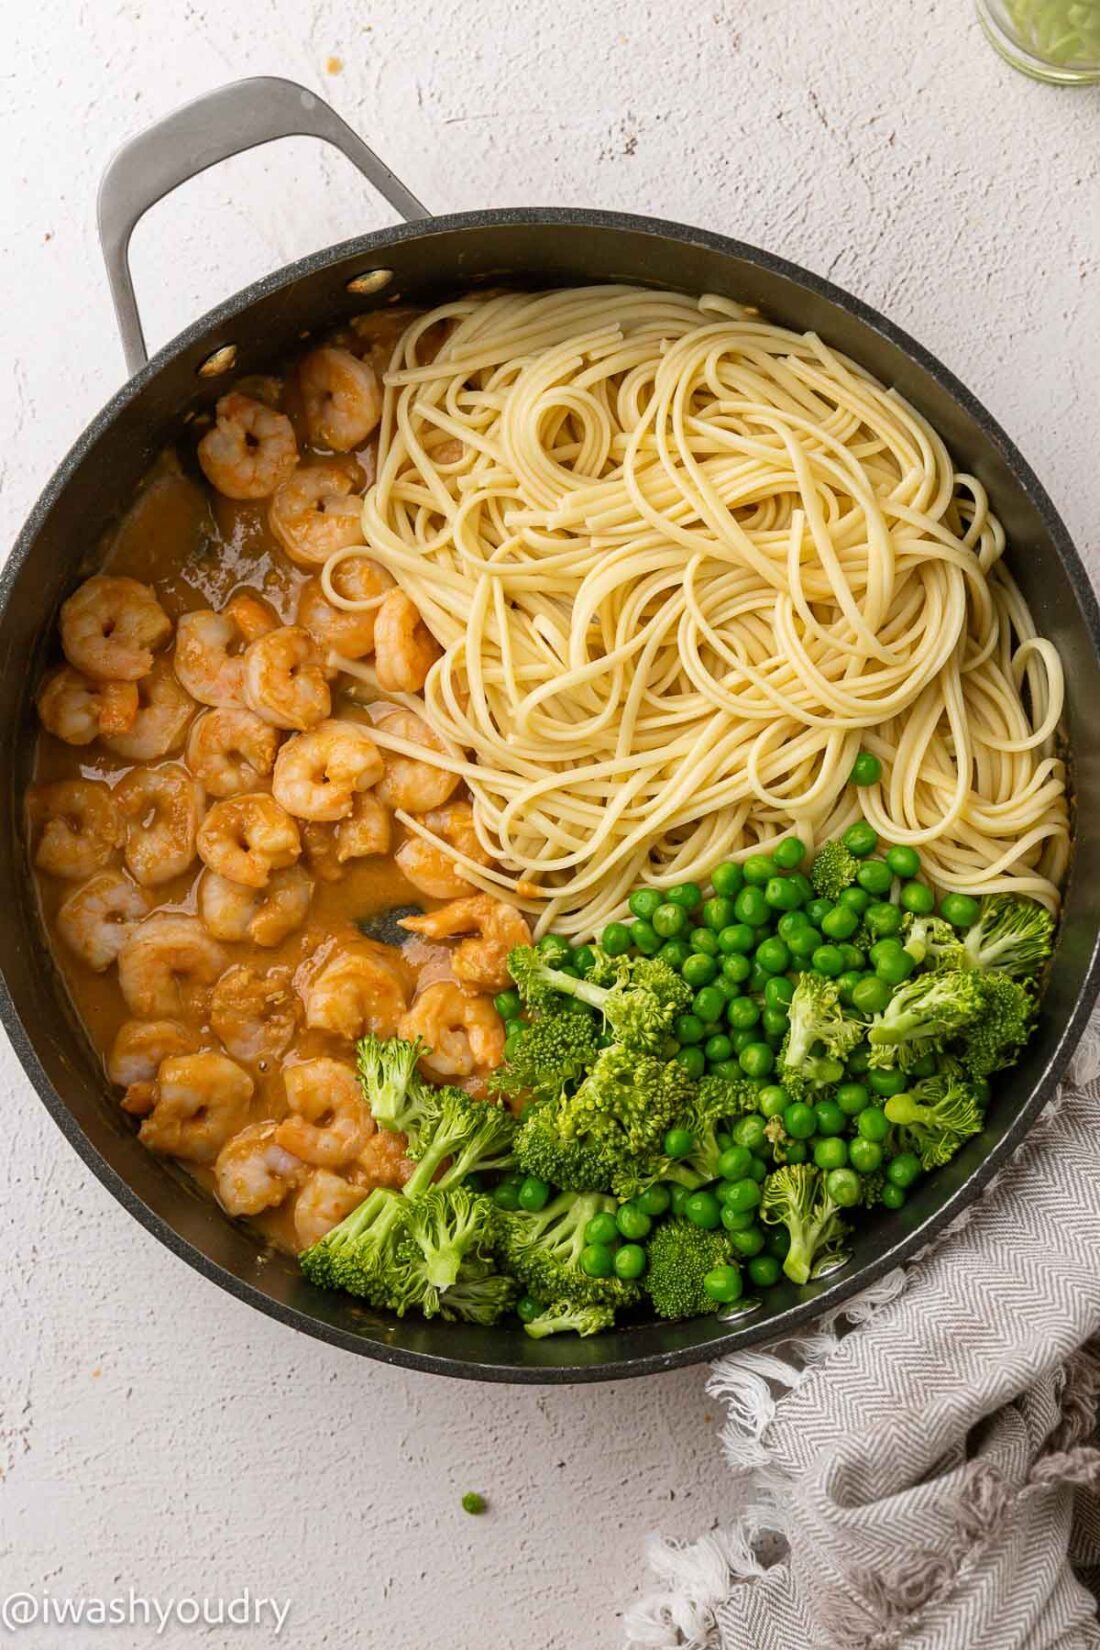 shrimp stir fry with noodles and broccoli in peanut sauce.